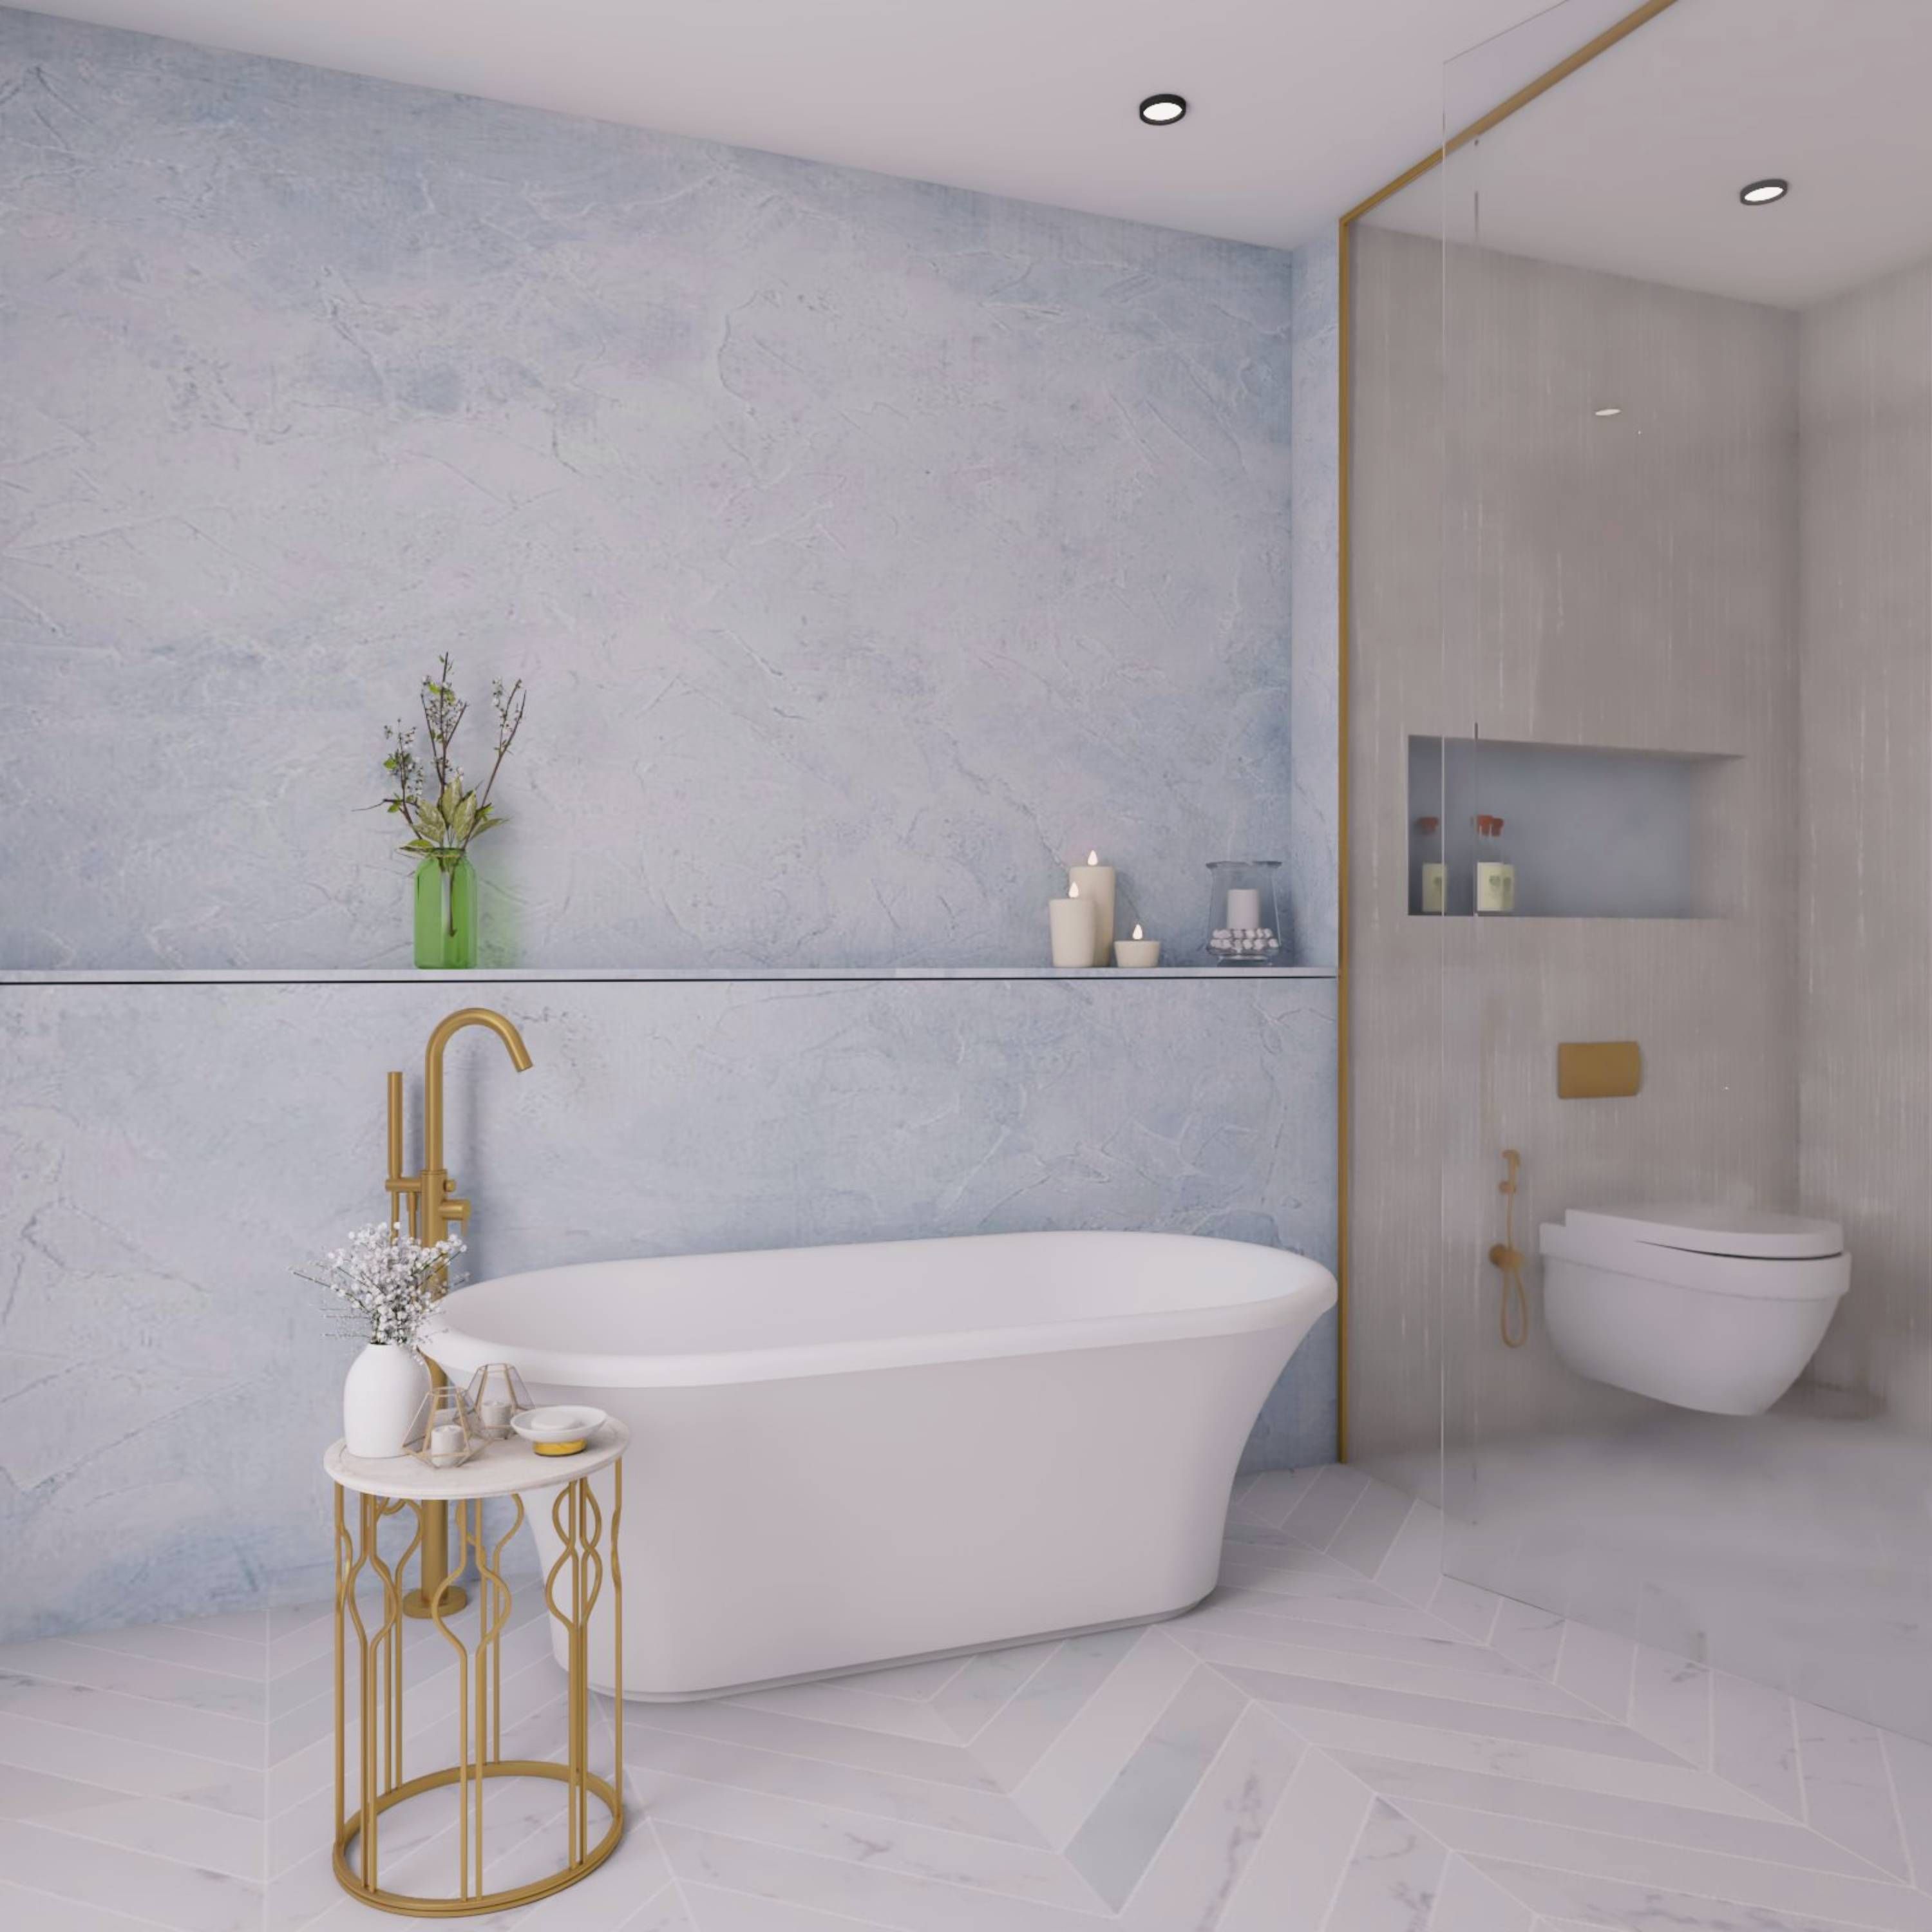 Minimal Beige And Light Blue Bathroom Design With Textured Blue-White Accent Wall Paint